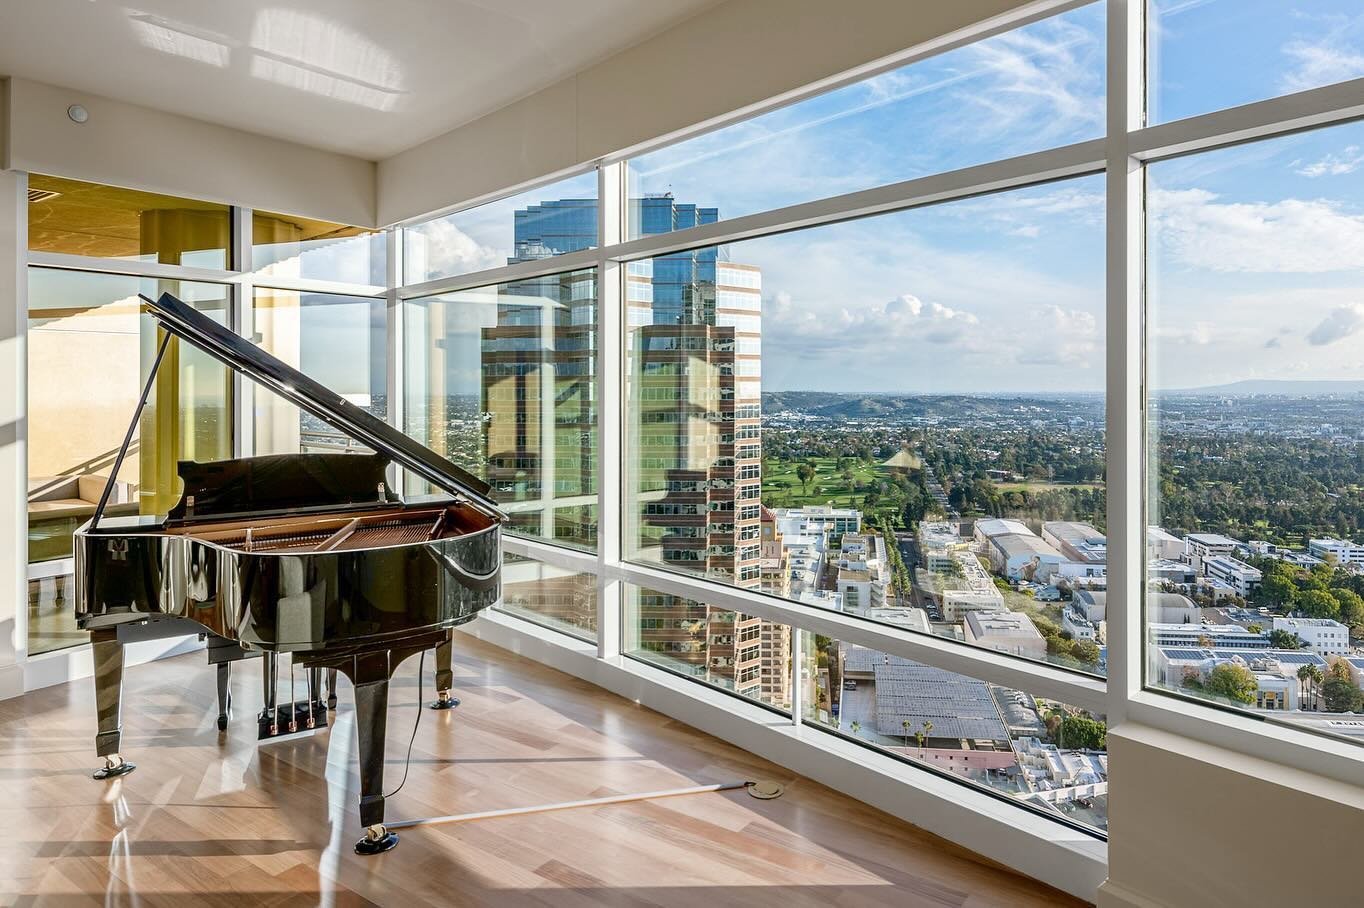 You could be playing piano with these day and night views of &ldquo;Nakatomi Plaza&rdquo; from The Century
.
.
.
#realestatephotography #losangelesrealestatephotographer #losangelesrealestatephotography #hollywoodrealestate #beverlyhills #belair #los